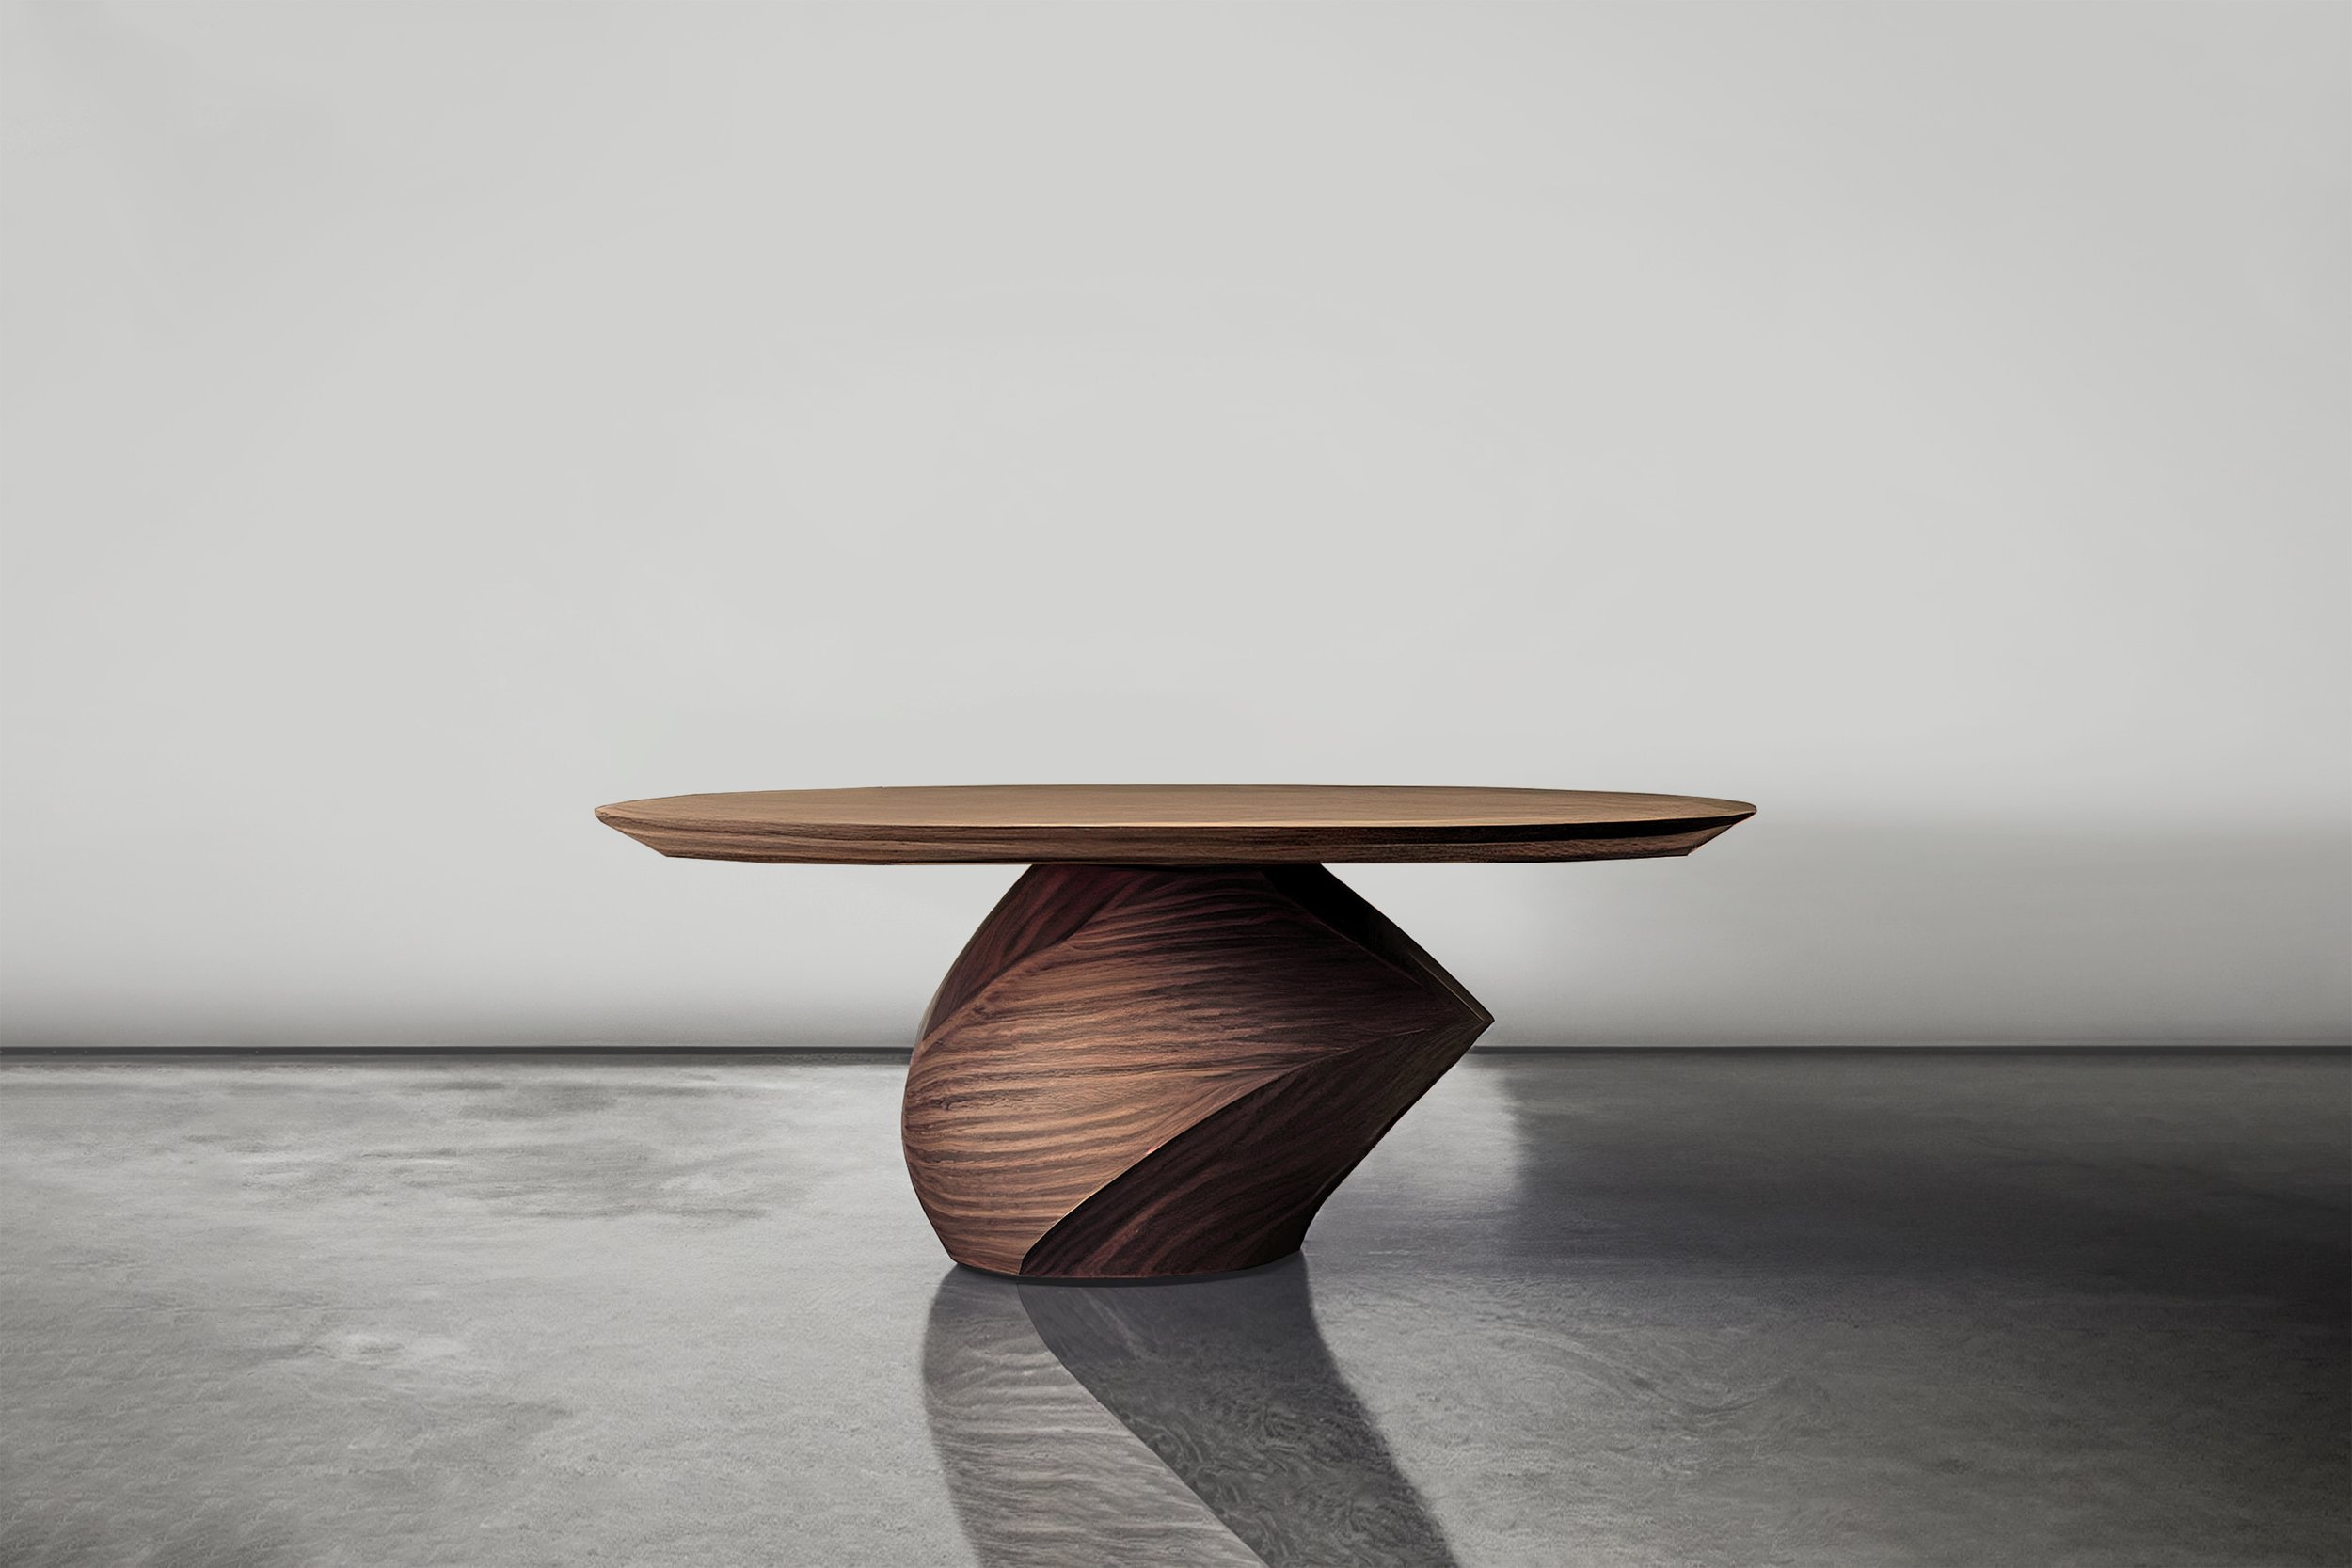 Sculptural Coffee Table Made of Solid Walnut Wood Solace S8 by Joel Escalona — 2.jpg